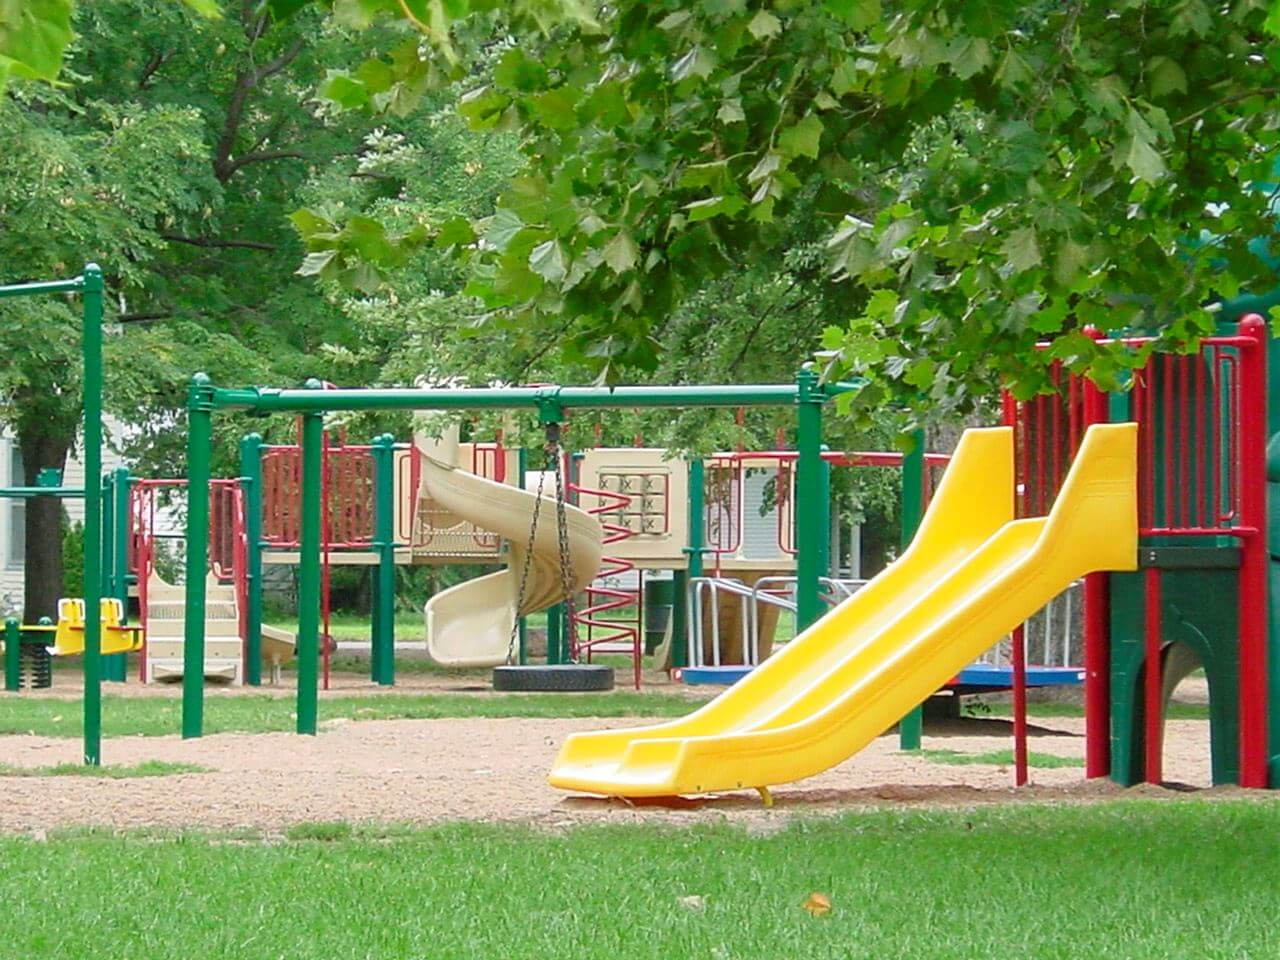 Photo of the Playground in City Park